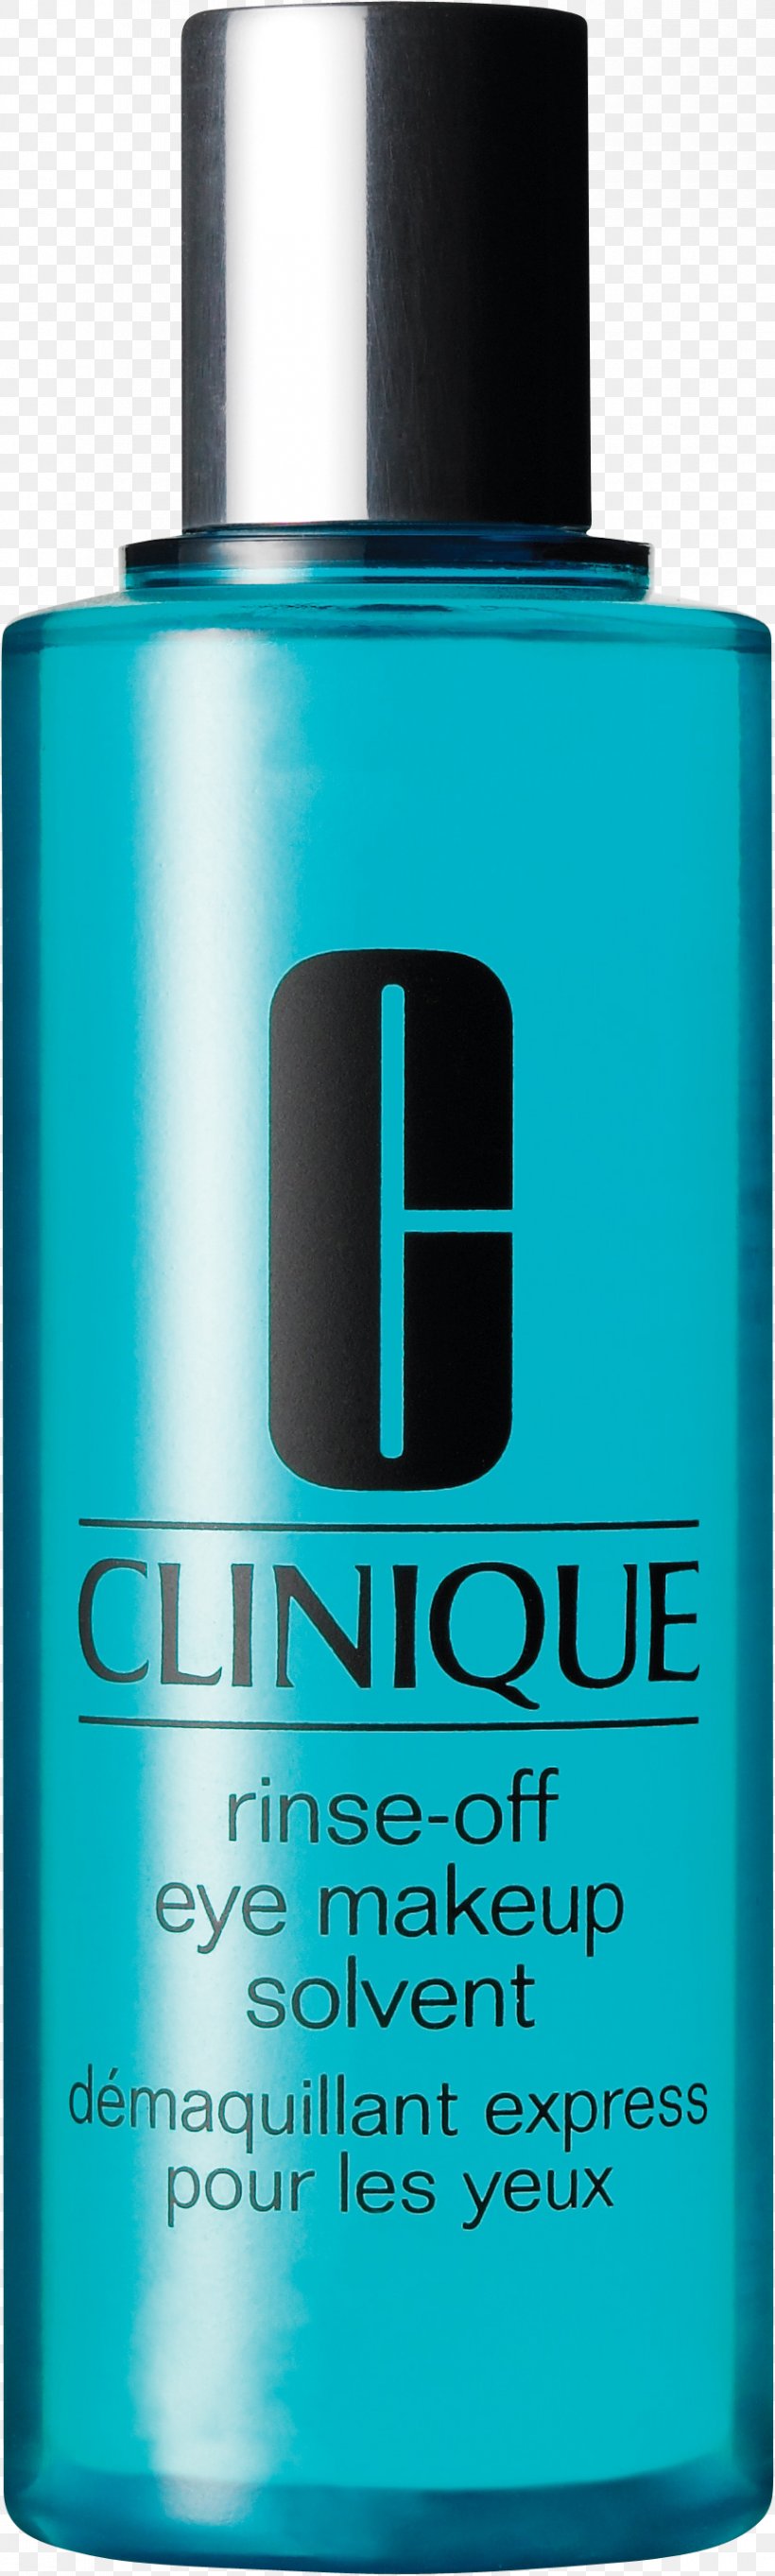 Clinique Lash Power Mascara Cosmetics Lotion Hair Conditioner, PNG, 862x2865px, Clinique, Cosmetics, Eye, Hair Conditioner, Irritation Download Free